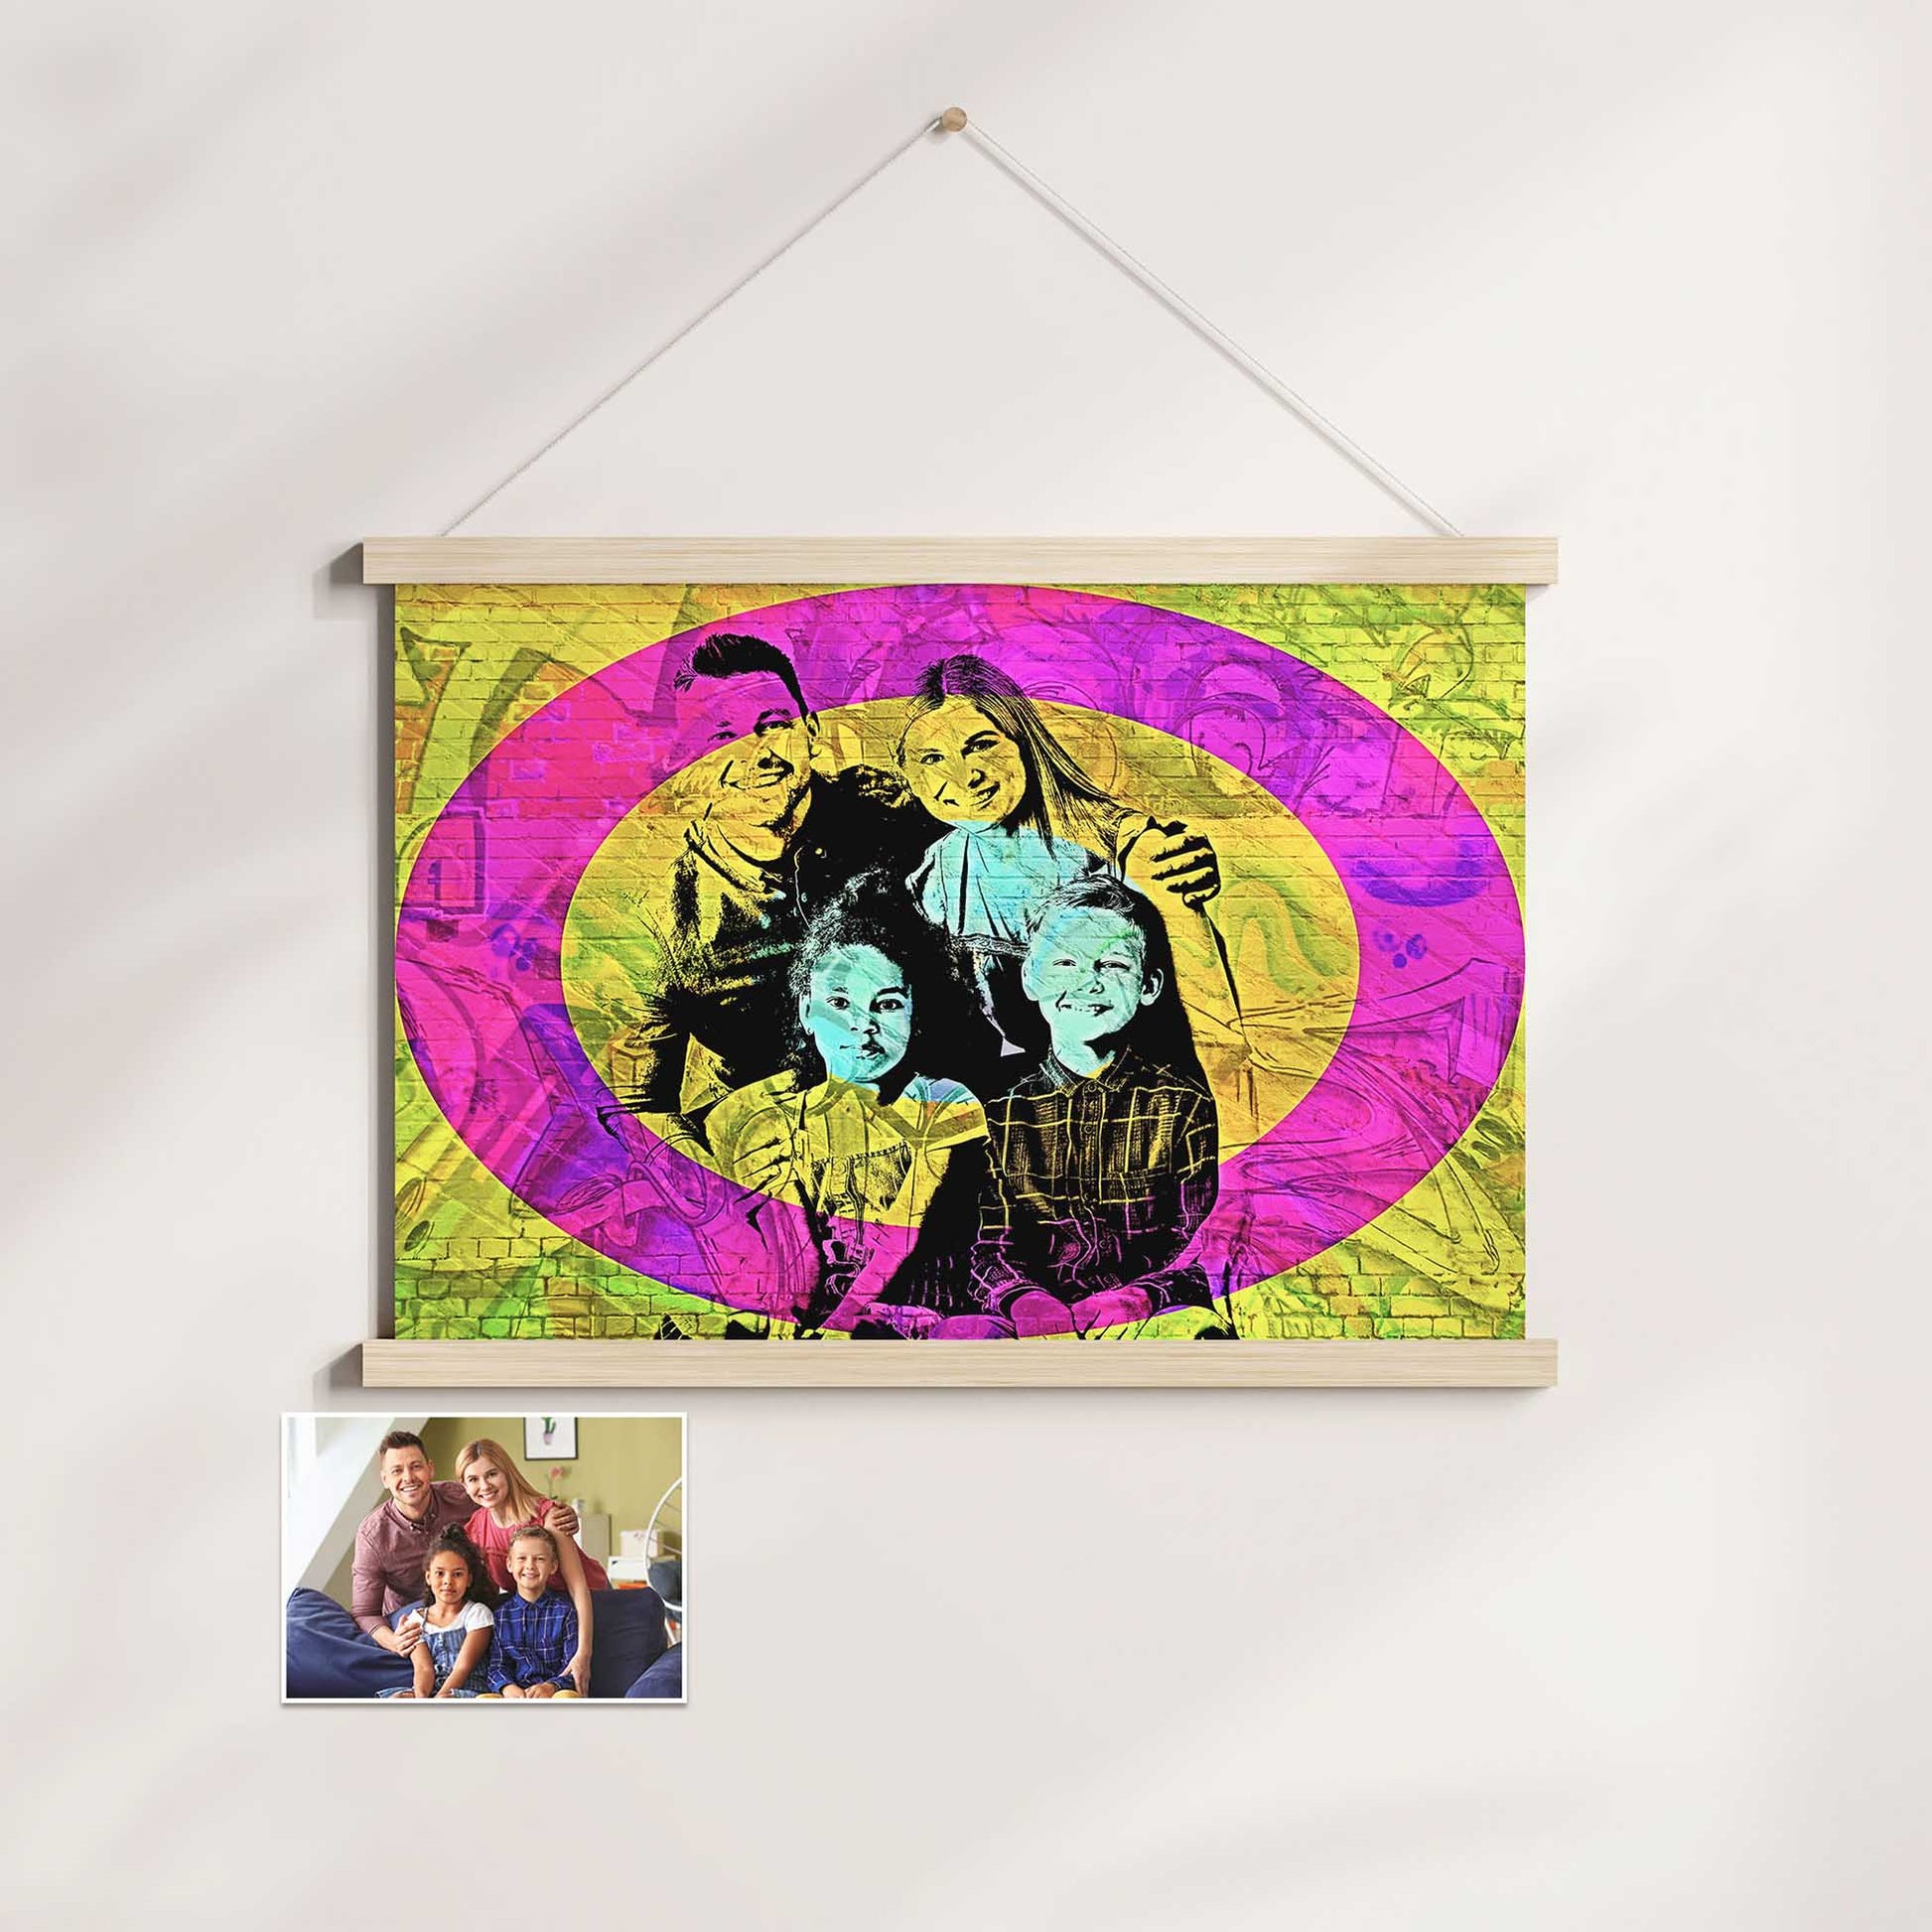 Elevate your interior design with the Personalised Graffiti Street Art Poster Hanger. This unique decor piece combines the best of street art aesthetics with a personal touch. Its cool and vibrant graffiti style adds a chic energy